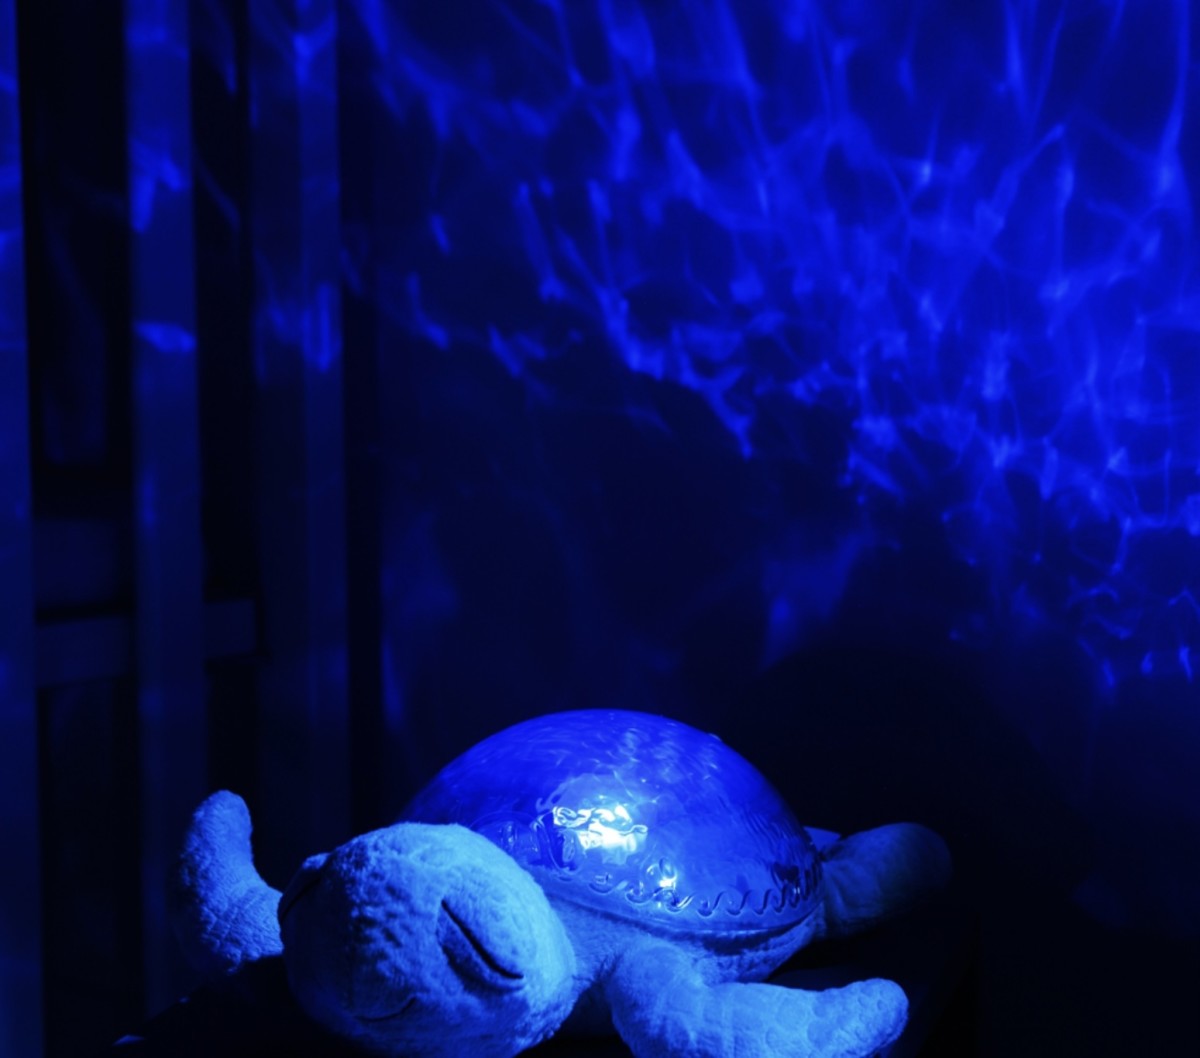 the-tranquil-turtle-and-twinkling-twilight-turtle-will-make-your-childs-bedroom-comfortable